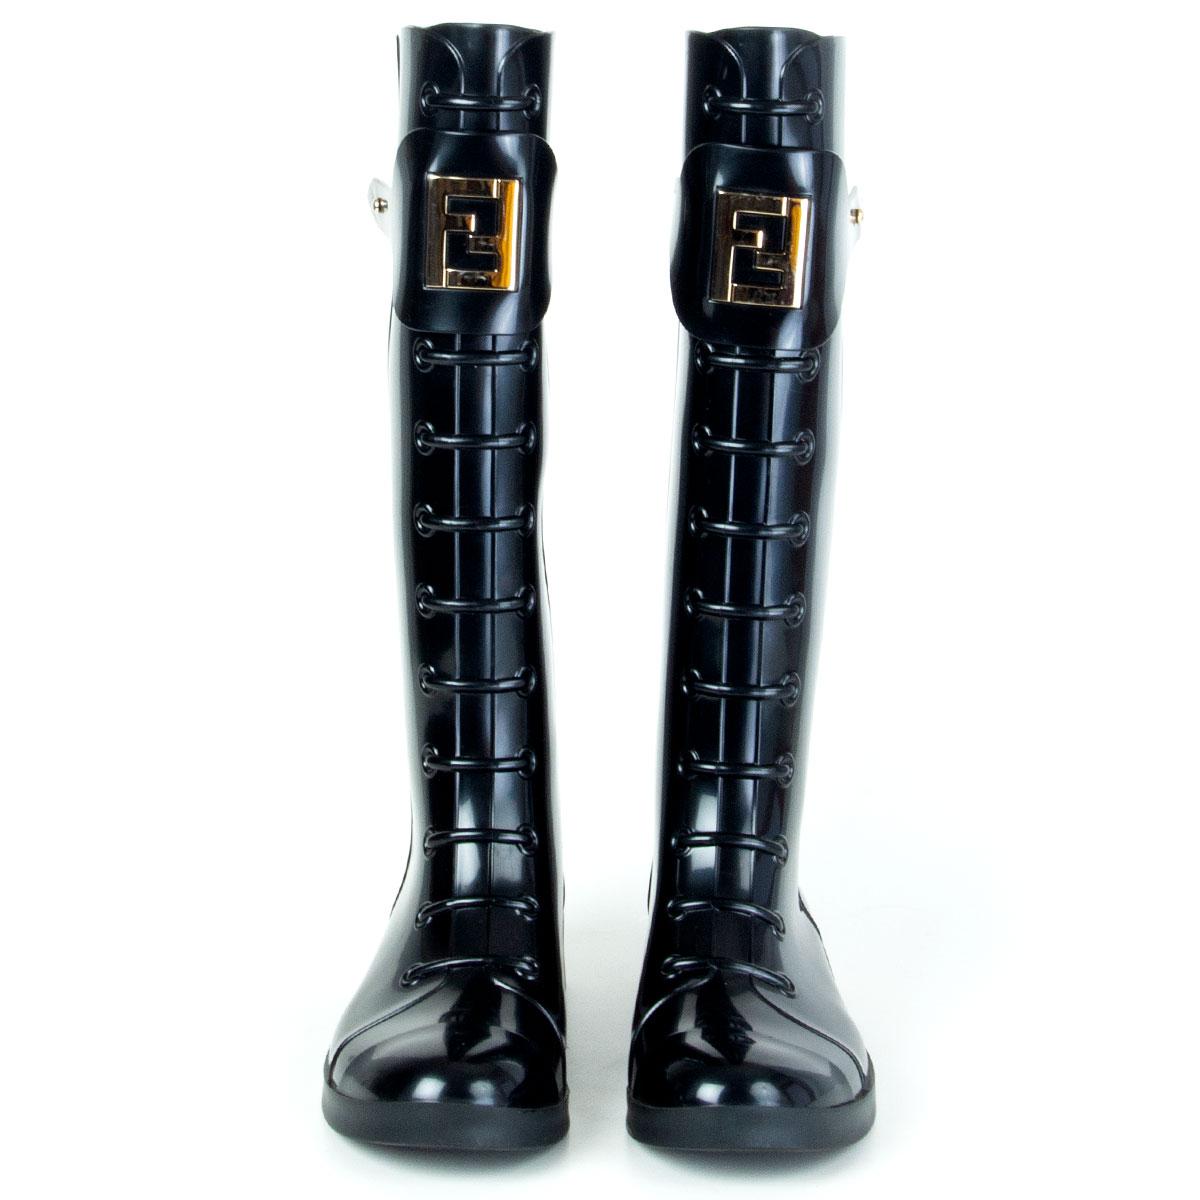 authentic Fendi Berlin knee-high lace-up rubber rain boots in black PVC. Gold-tone metal logo embellishment at front. Have been worn and are in excellent condition. 

Imprinted Size 35
Shoe Size 35
Inside Sole 22cm (8.6in)
Width 7cm (2.7in)
Heel